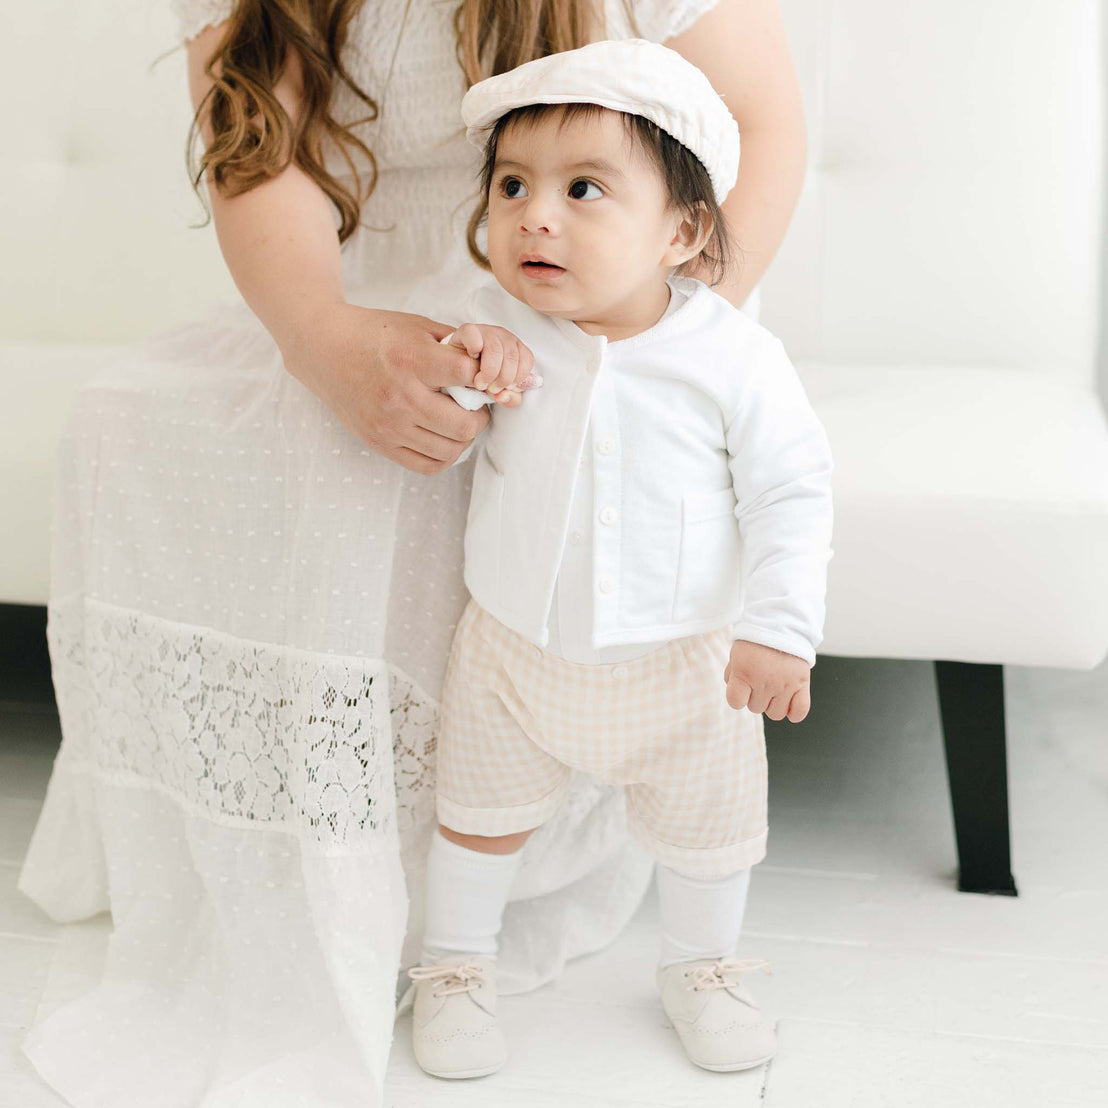 A toddler, wearing the Ian Fawn Shorts Set with a matching hat, stands holding a woman's hand, partially visible in a white dress, in a brightly lit room with white decor.